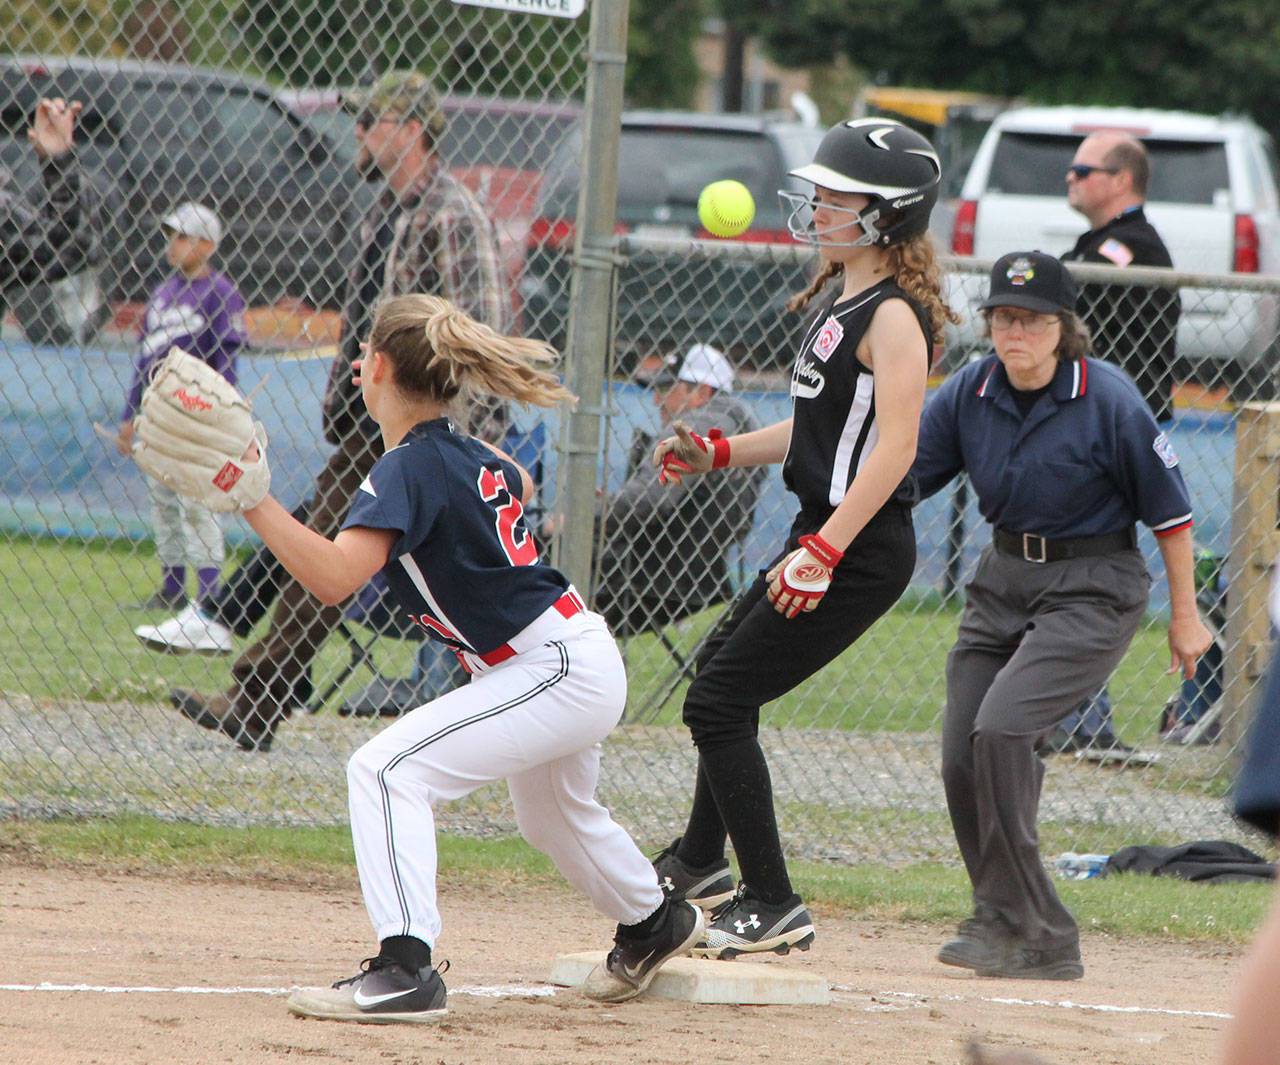 The ball gets away from South Skagit third baseman Ryan Holt, allowing Gwen Gustafson to head home for a run as umpire Rita Cline watches the play. (Photo by Jim Waller/Whidbey News-Times)